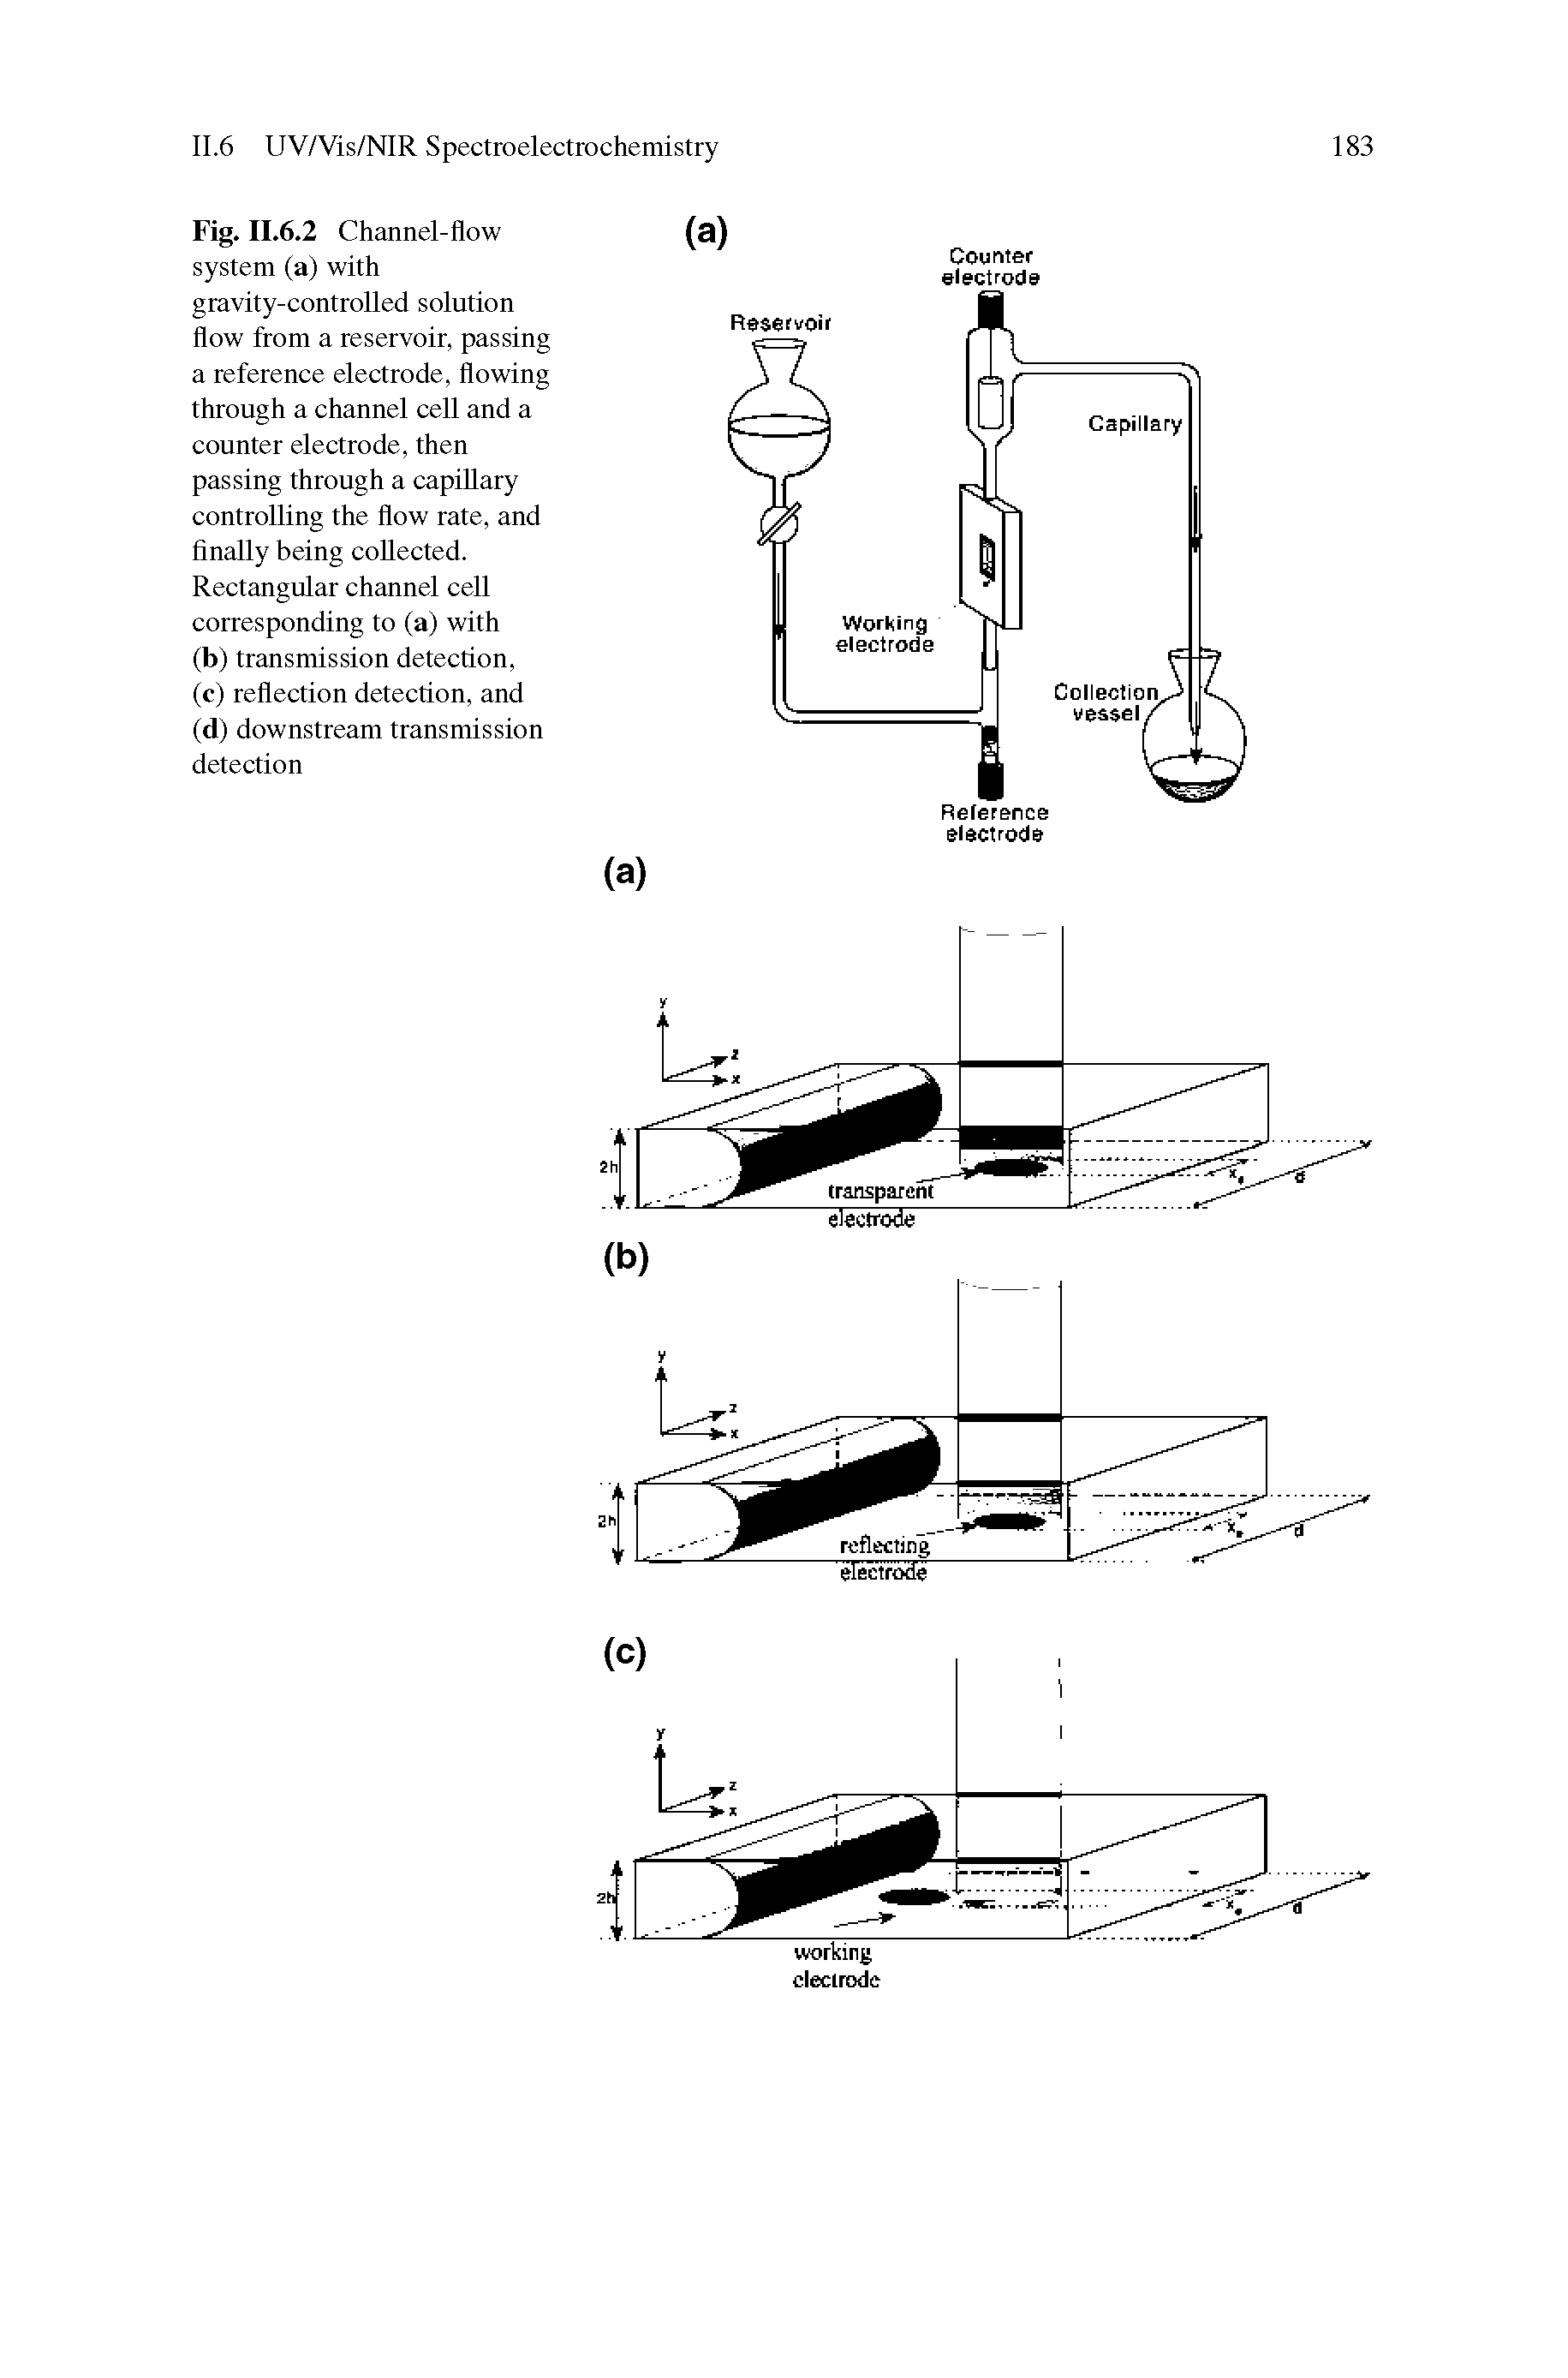 Fig. II.6.2 Channel-flow system (a) with gravity-controlled solution flow from a reservoir, passing a reference electrode, flowing through a channel cell and a counter electrode, then passing through a capillary controlling the flow rate, and finally being collected. Rectangular channel cell corresponding to (a) with...